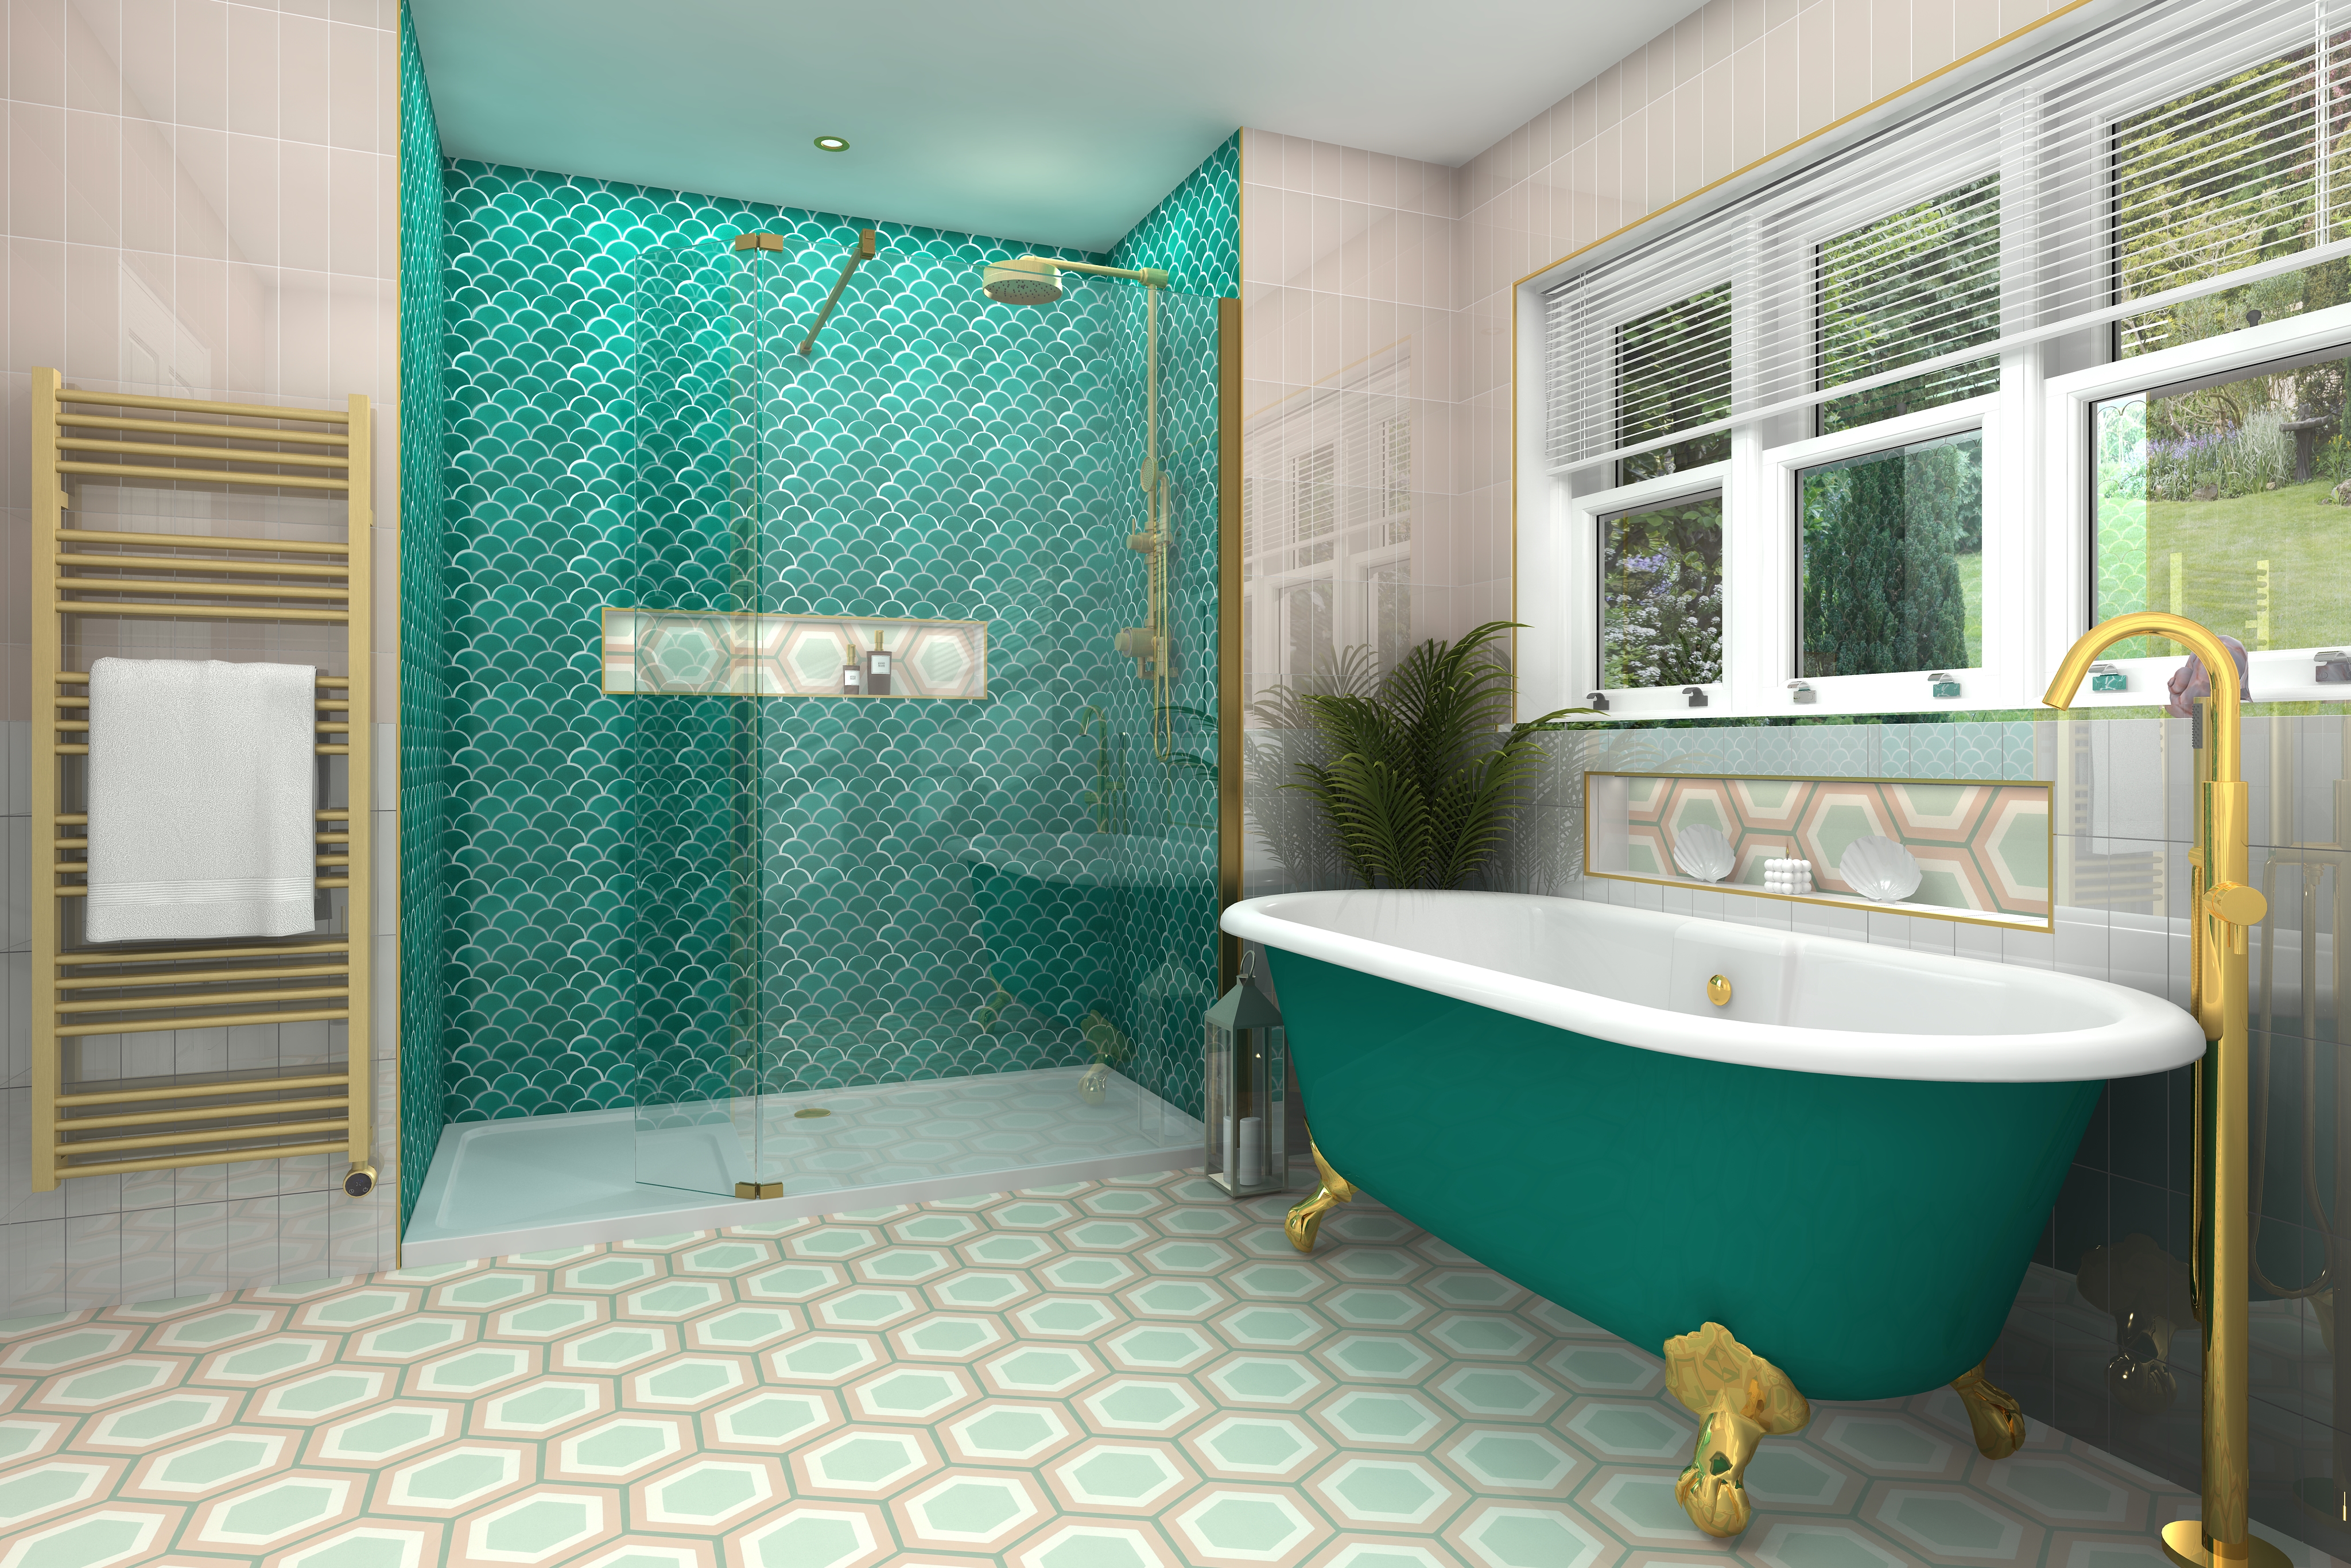 Digital lifestyle image of the Pisces inspired bathroom, with scale effect green wall tiles inside the shower enclosure, with raised acrylic shower tray, hinged shower screen with gold brackets, gold exposed shower set with handset shower and wall mounted showerhead, gold radiator, green freestanding bath with gold clawfeet paired with gold floorstanding taps and handset shower attachment